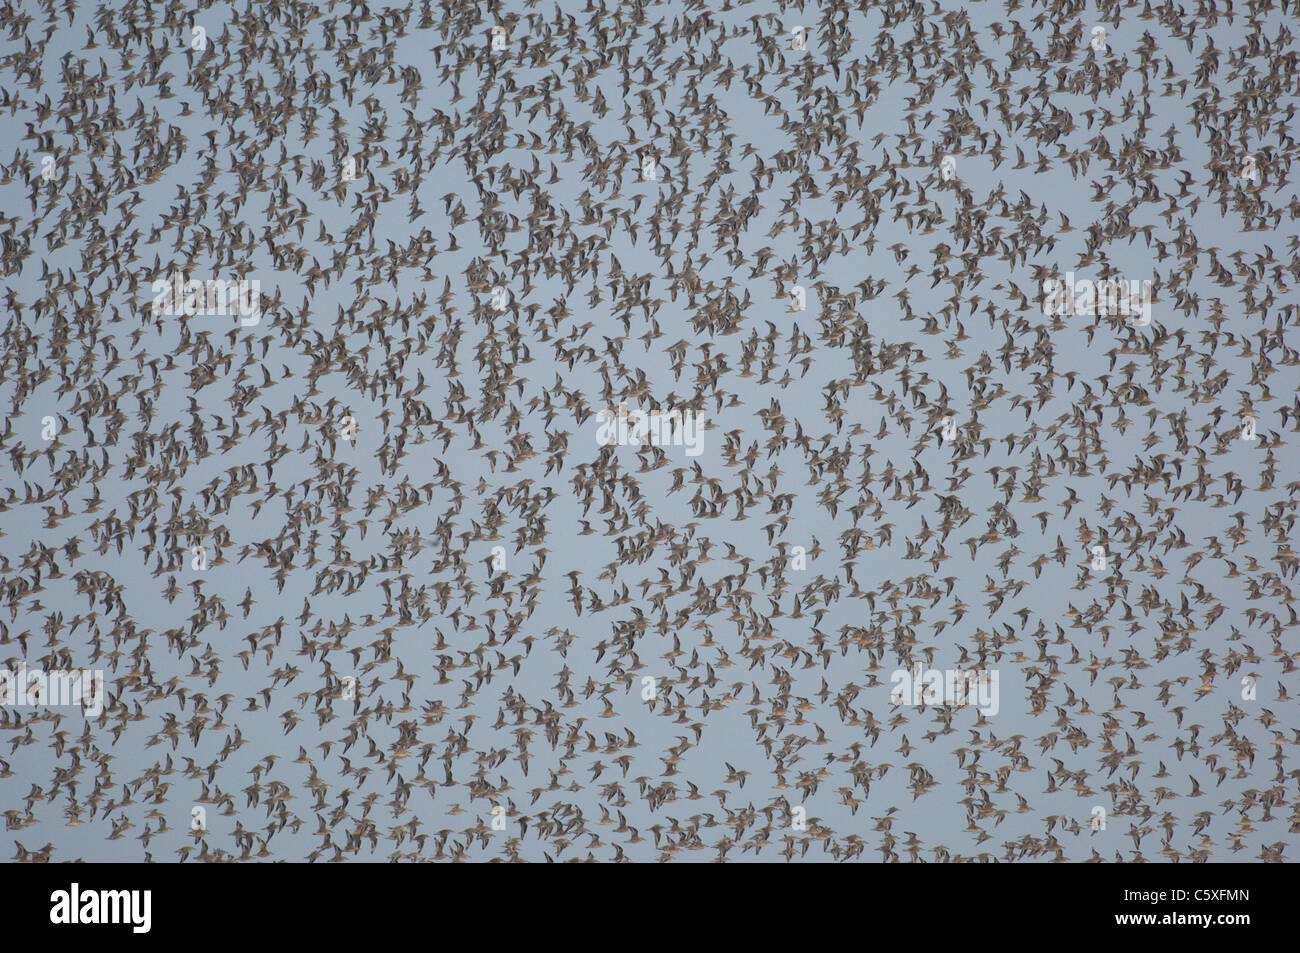 Knot Calidris canutus  Tens of thousands of knot move as one as they fly to a high tide roost  Norfolk, UK Stock Photo